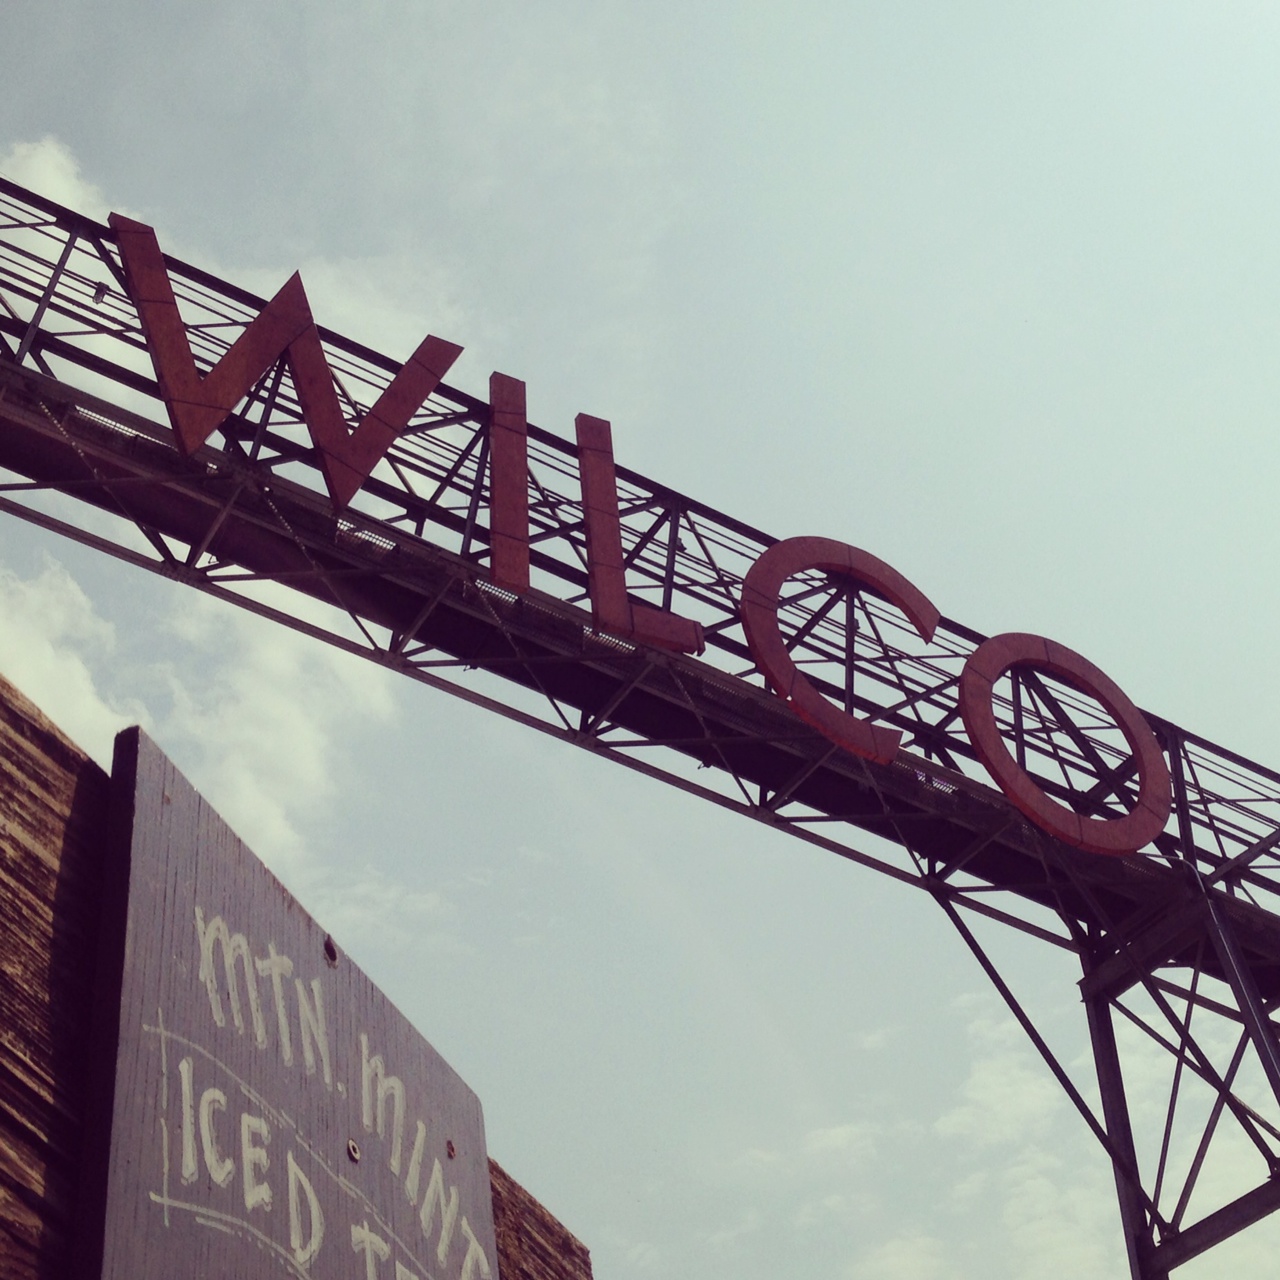 Solid Sound Festival 2013: A Trip to Wilco Land